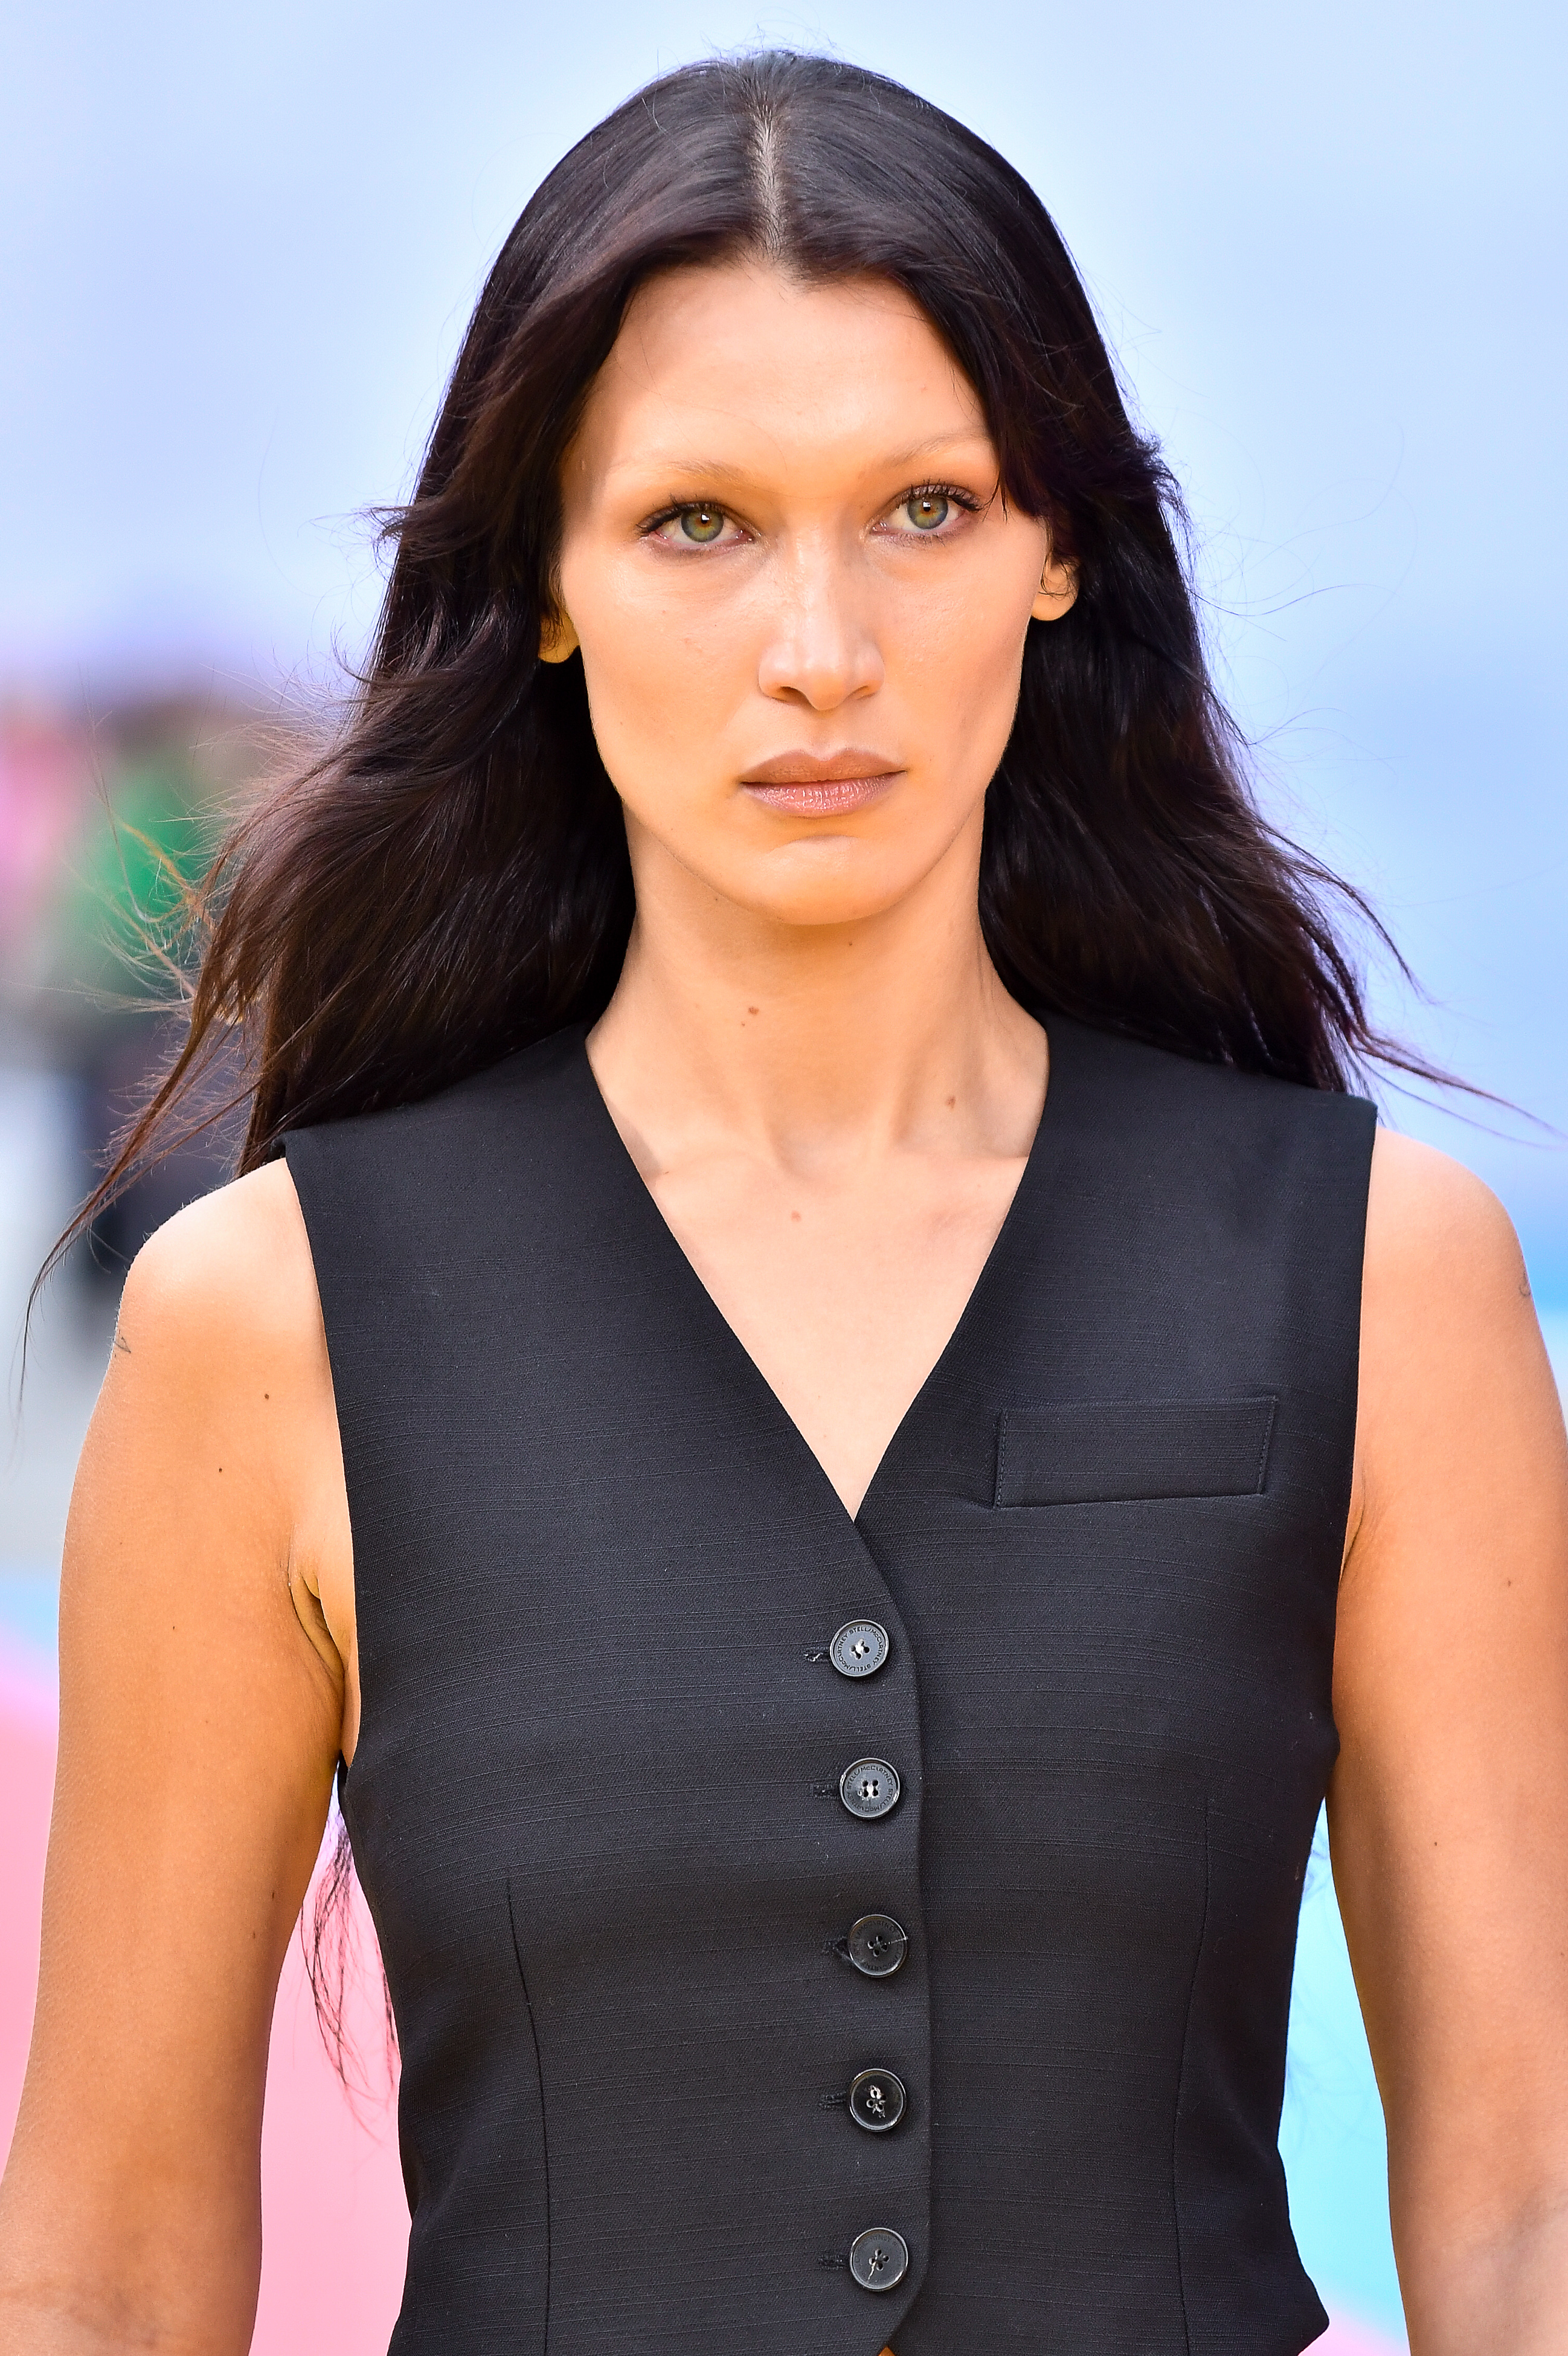 Bella Hadid on October 3, 2022 in Paris, France. | Source: Getty Images